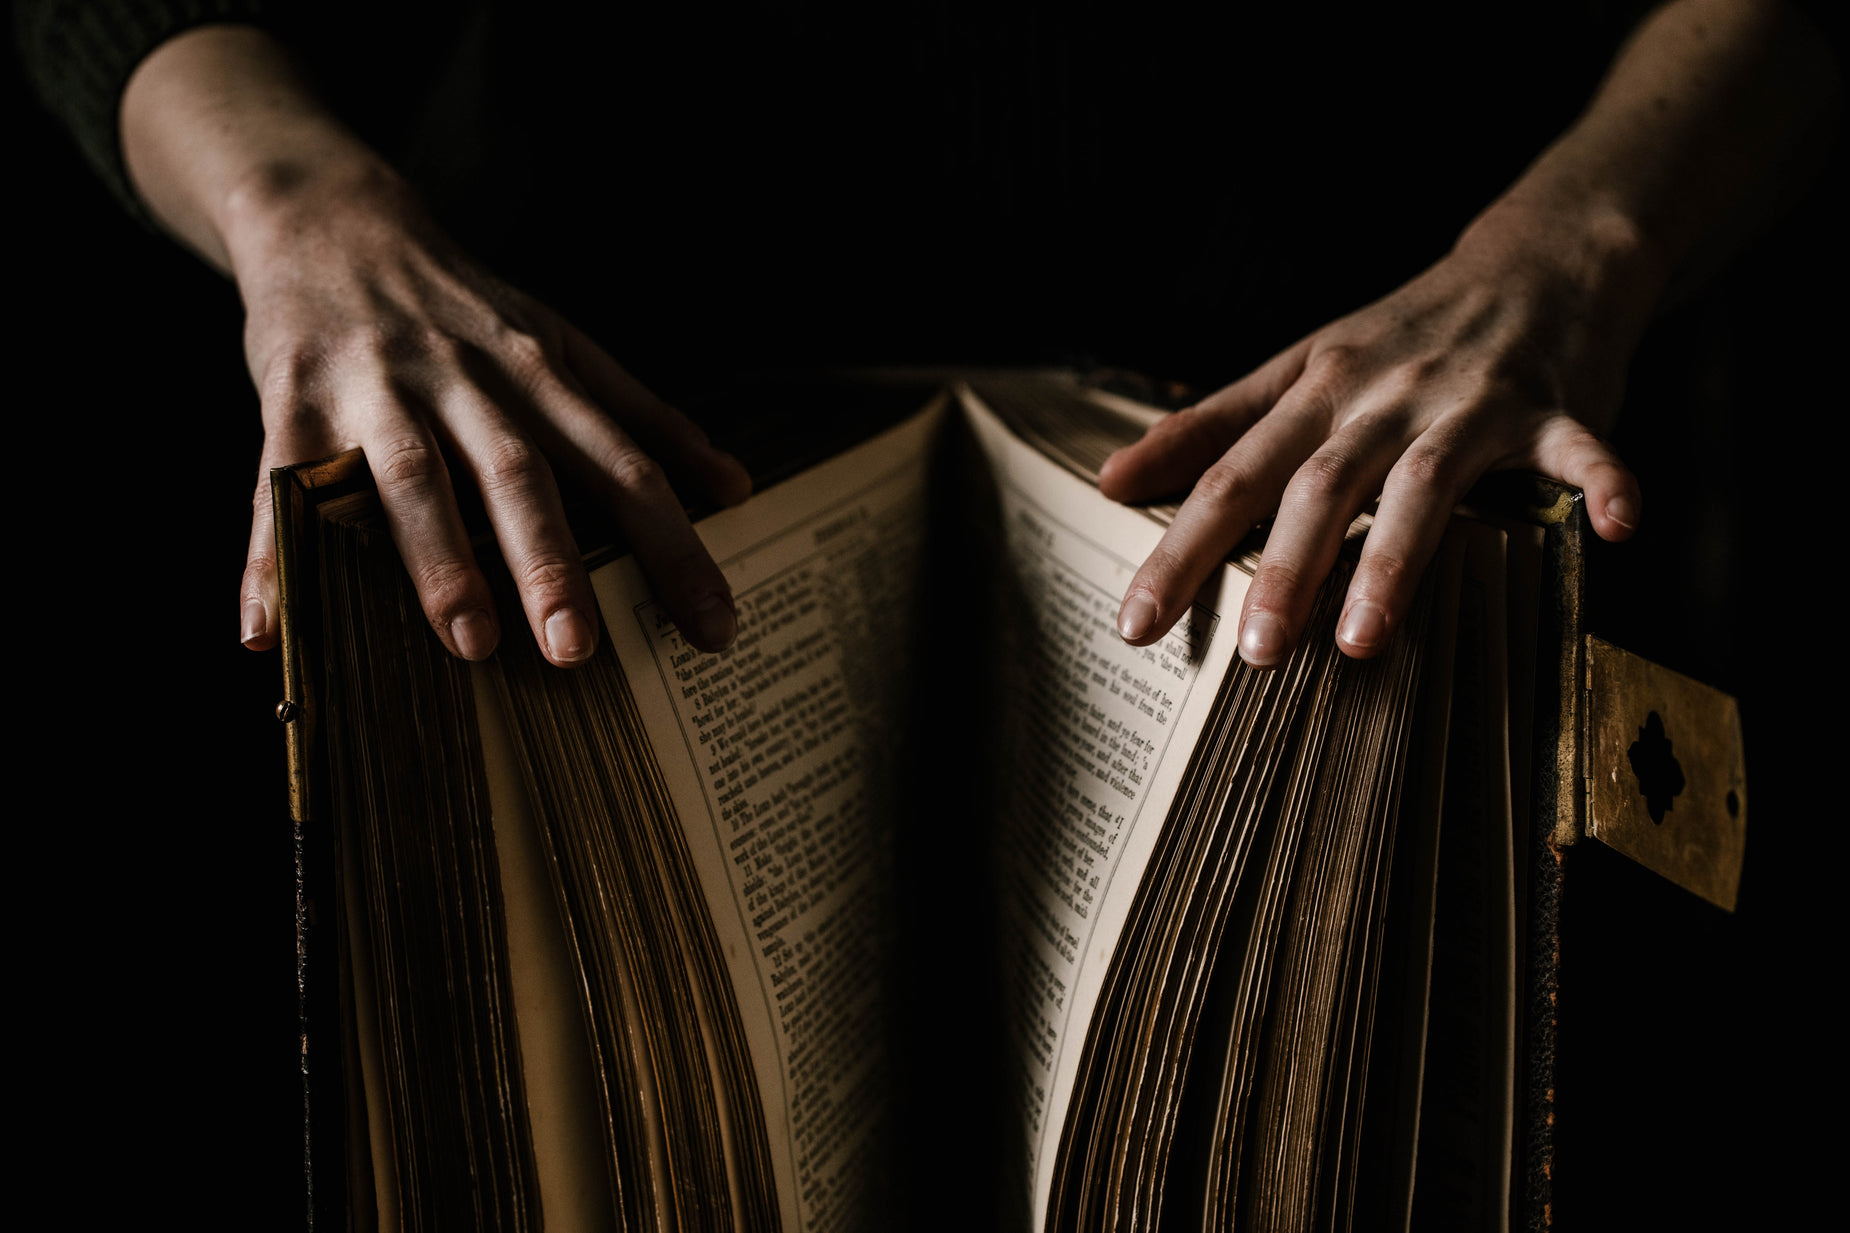 a person reading an open book with hands and pages